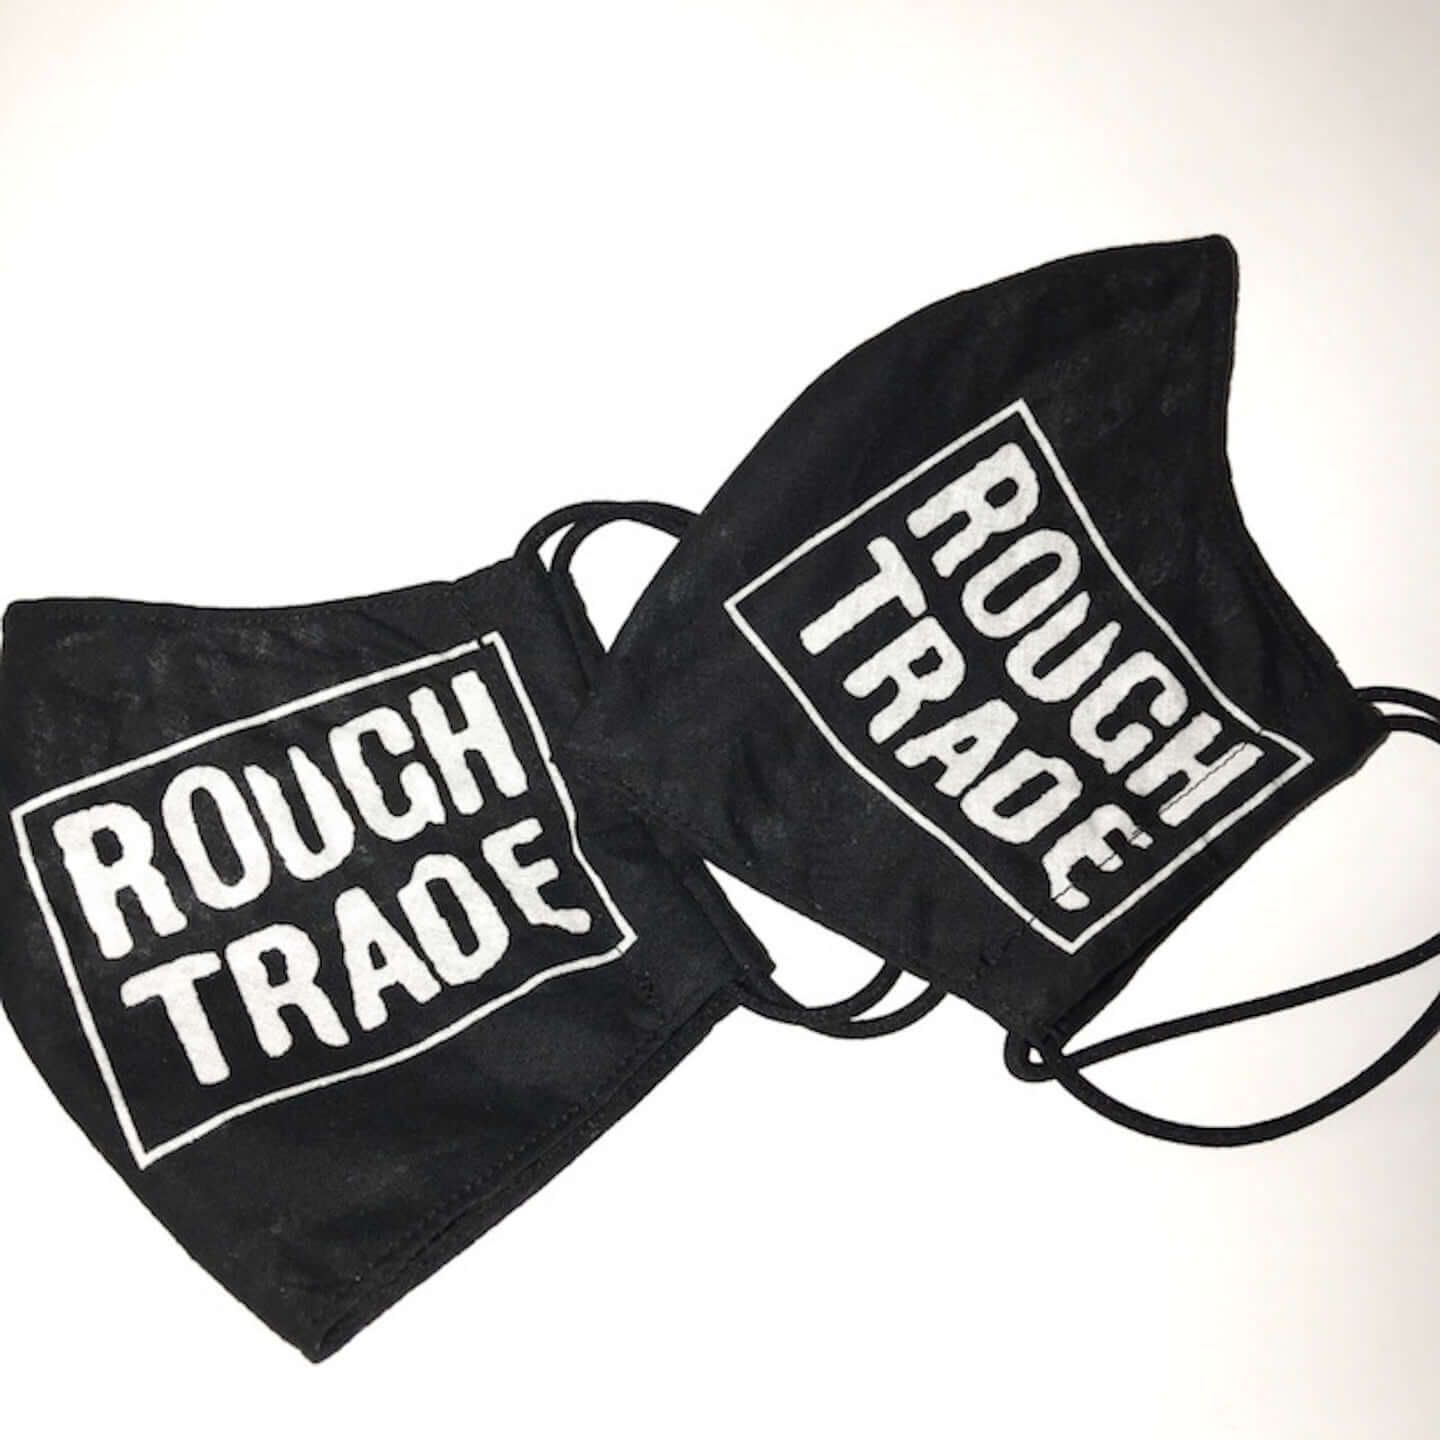 Rough Trade Recordsの特別展示が代官山蔦屋書店にて開催中！